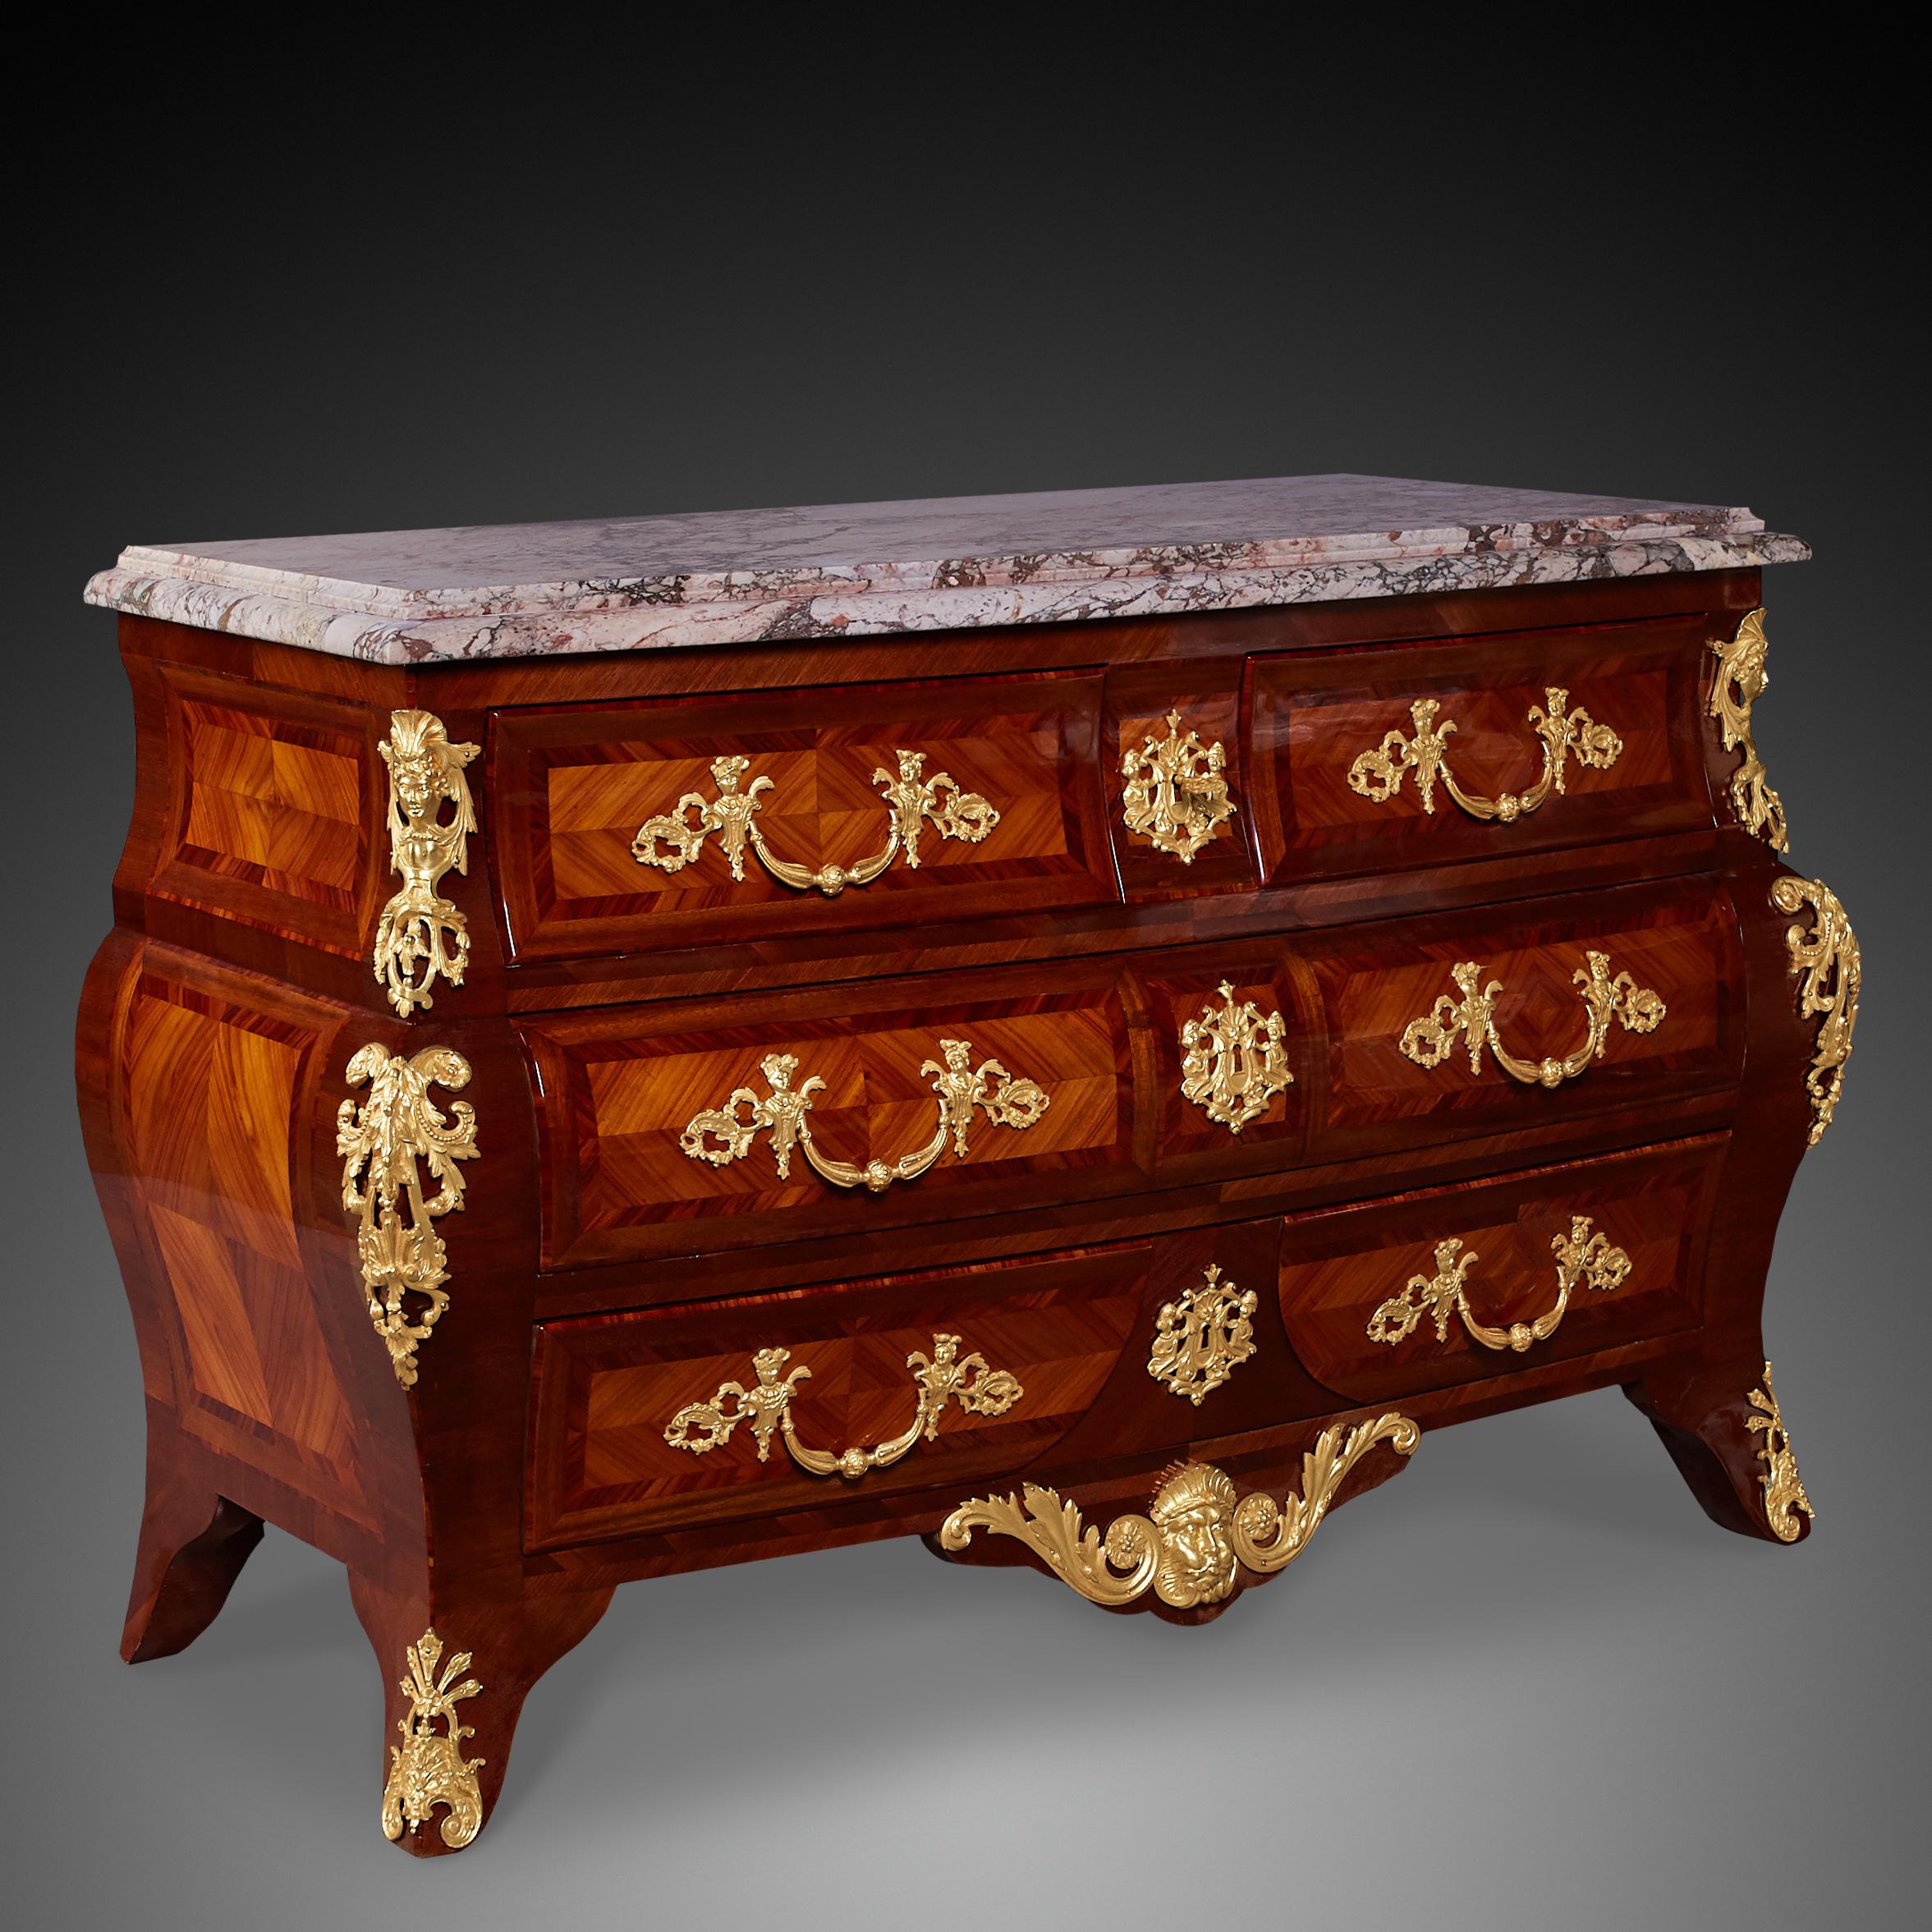 French 19th century, styl Louis XVI commode.This cabinet is after very good quality renovation.